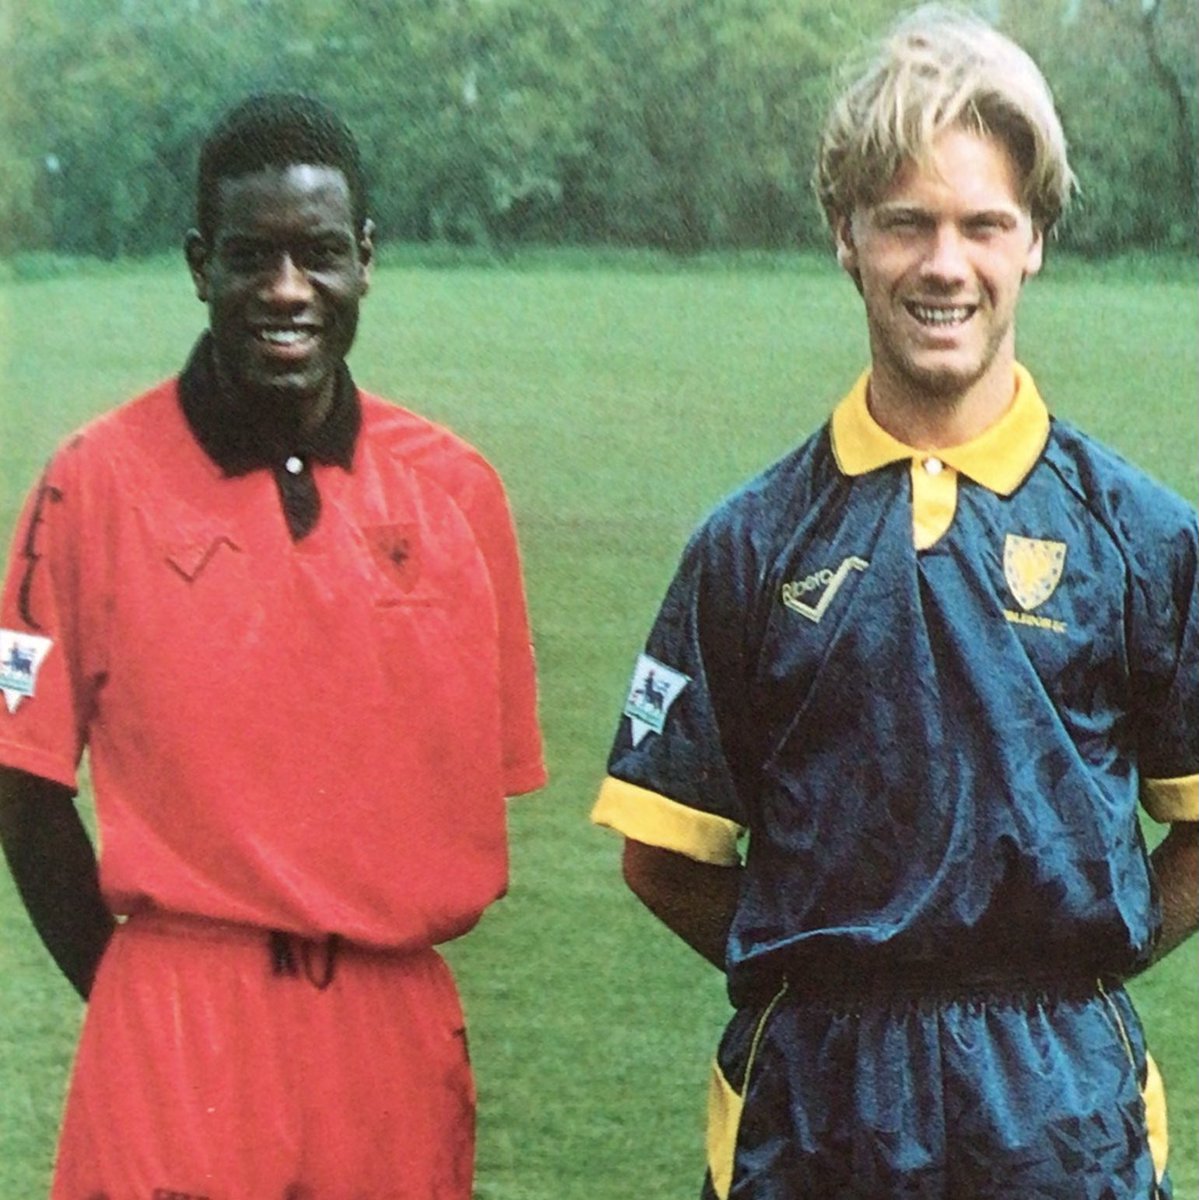 One from the archives: The launch of #Wimbledon’s kits for the 93/94 season, when we’d go on to finish sixth in the Premier League under Joe Kinnear, as football remembers this week. #TBT #AFCW